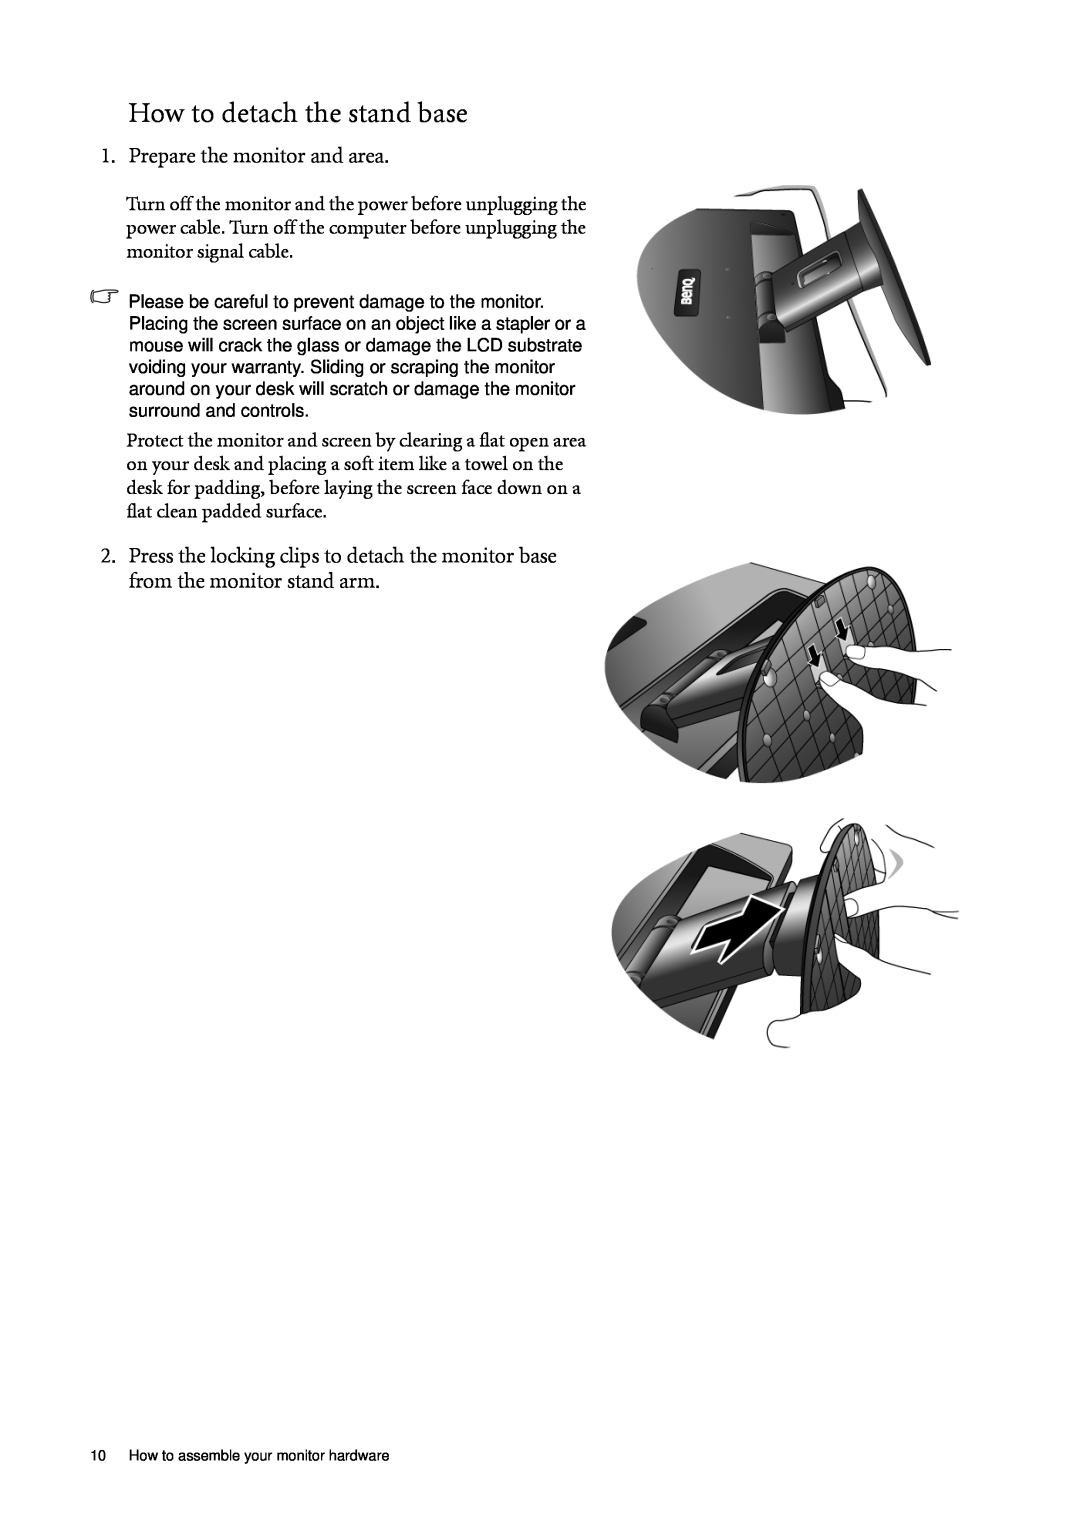 BenQ G2220HDA, G2020HDA user manual How to detach the stand base, Prepare the monitor and area 